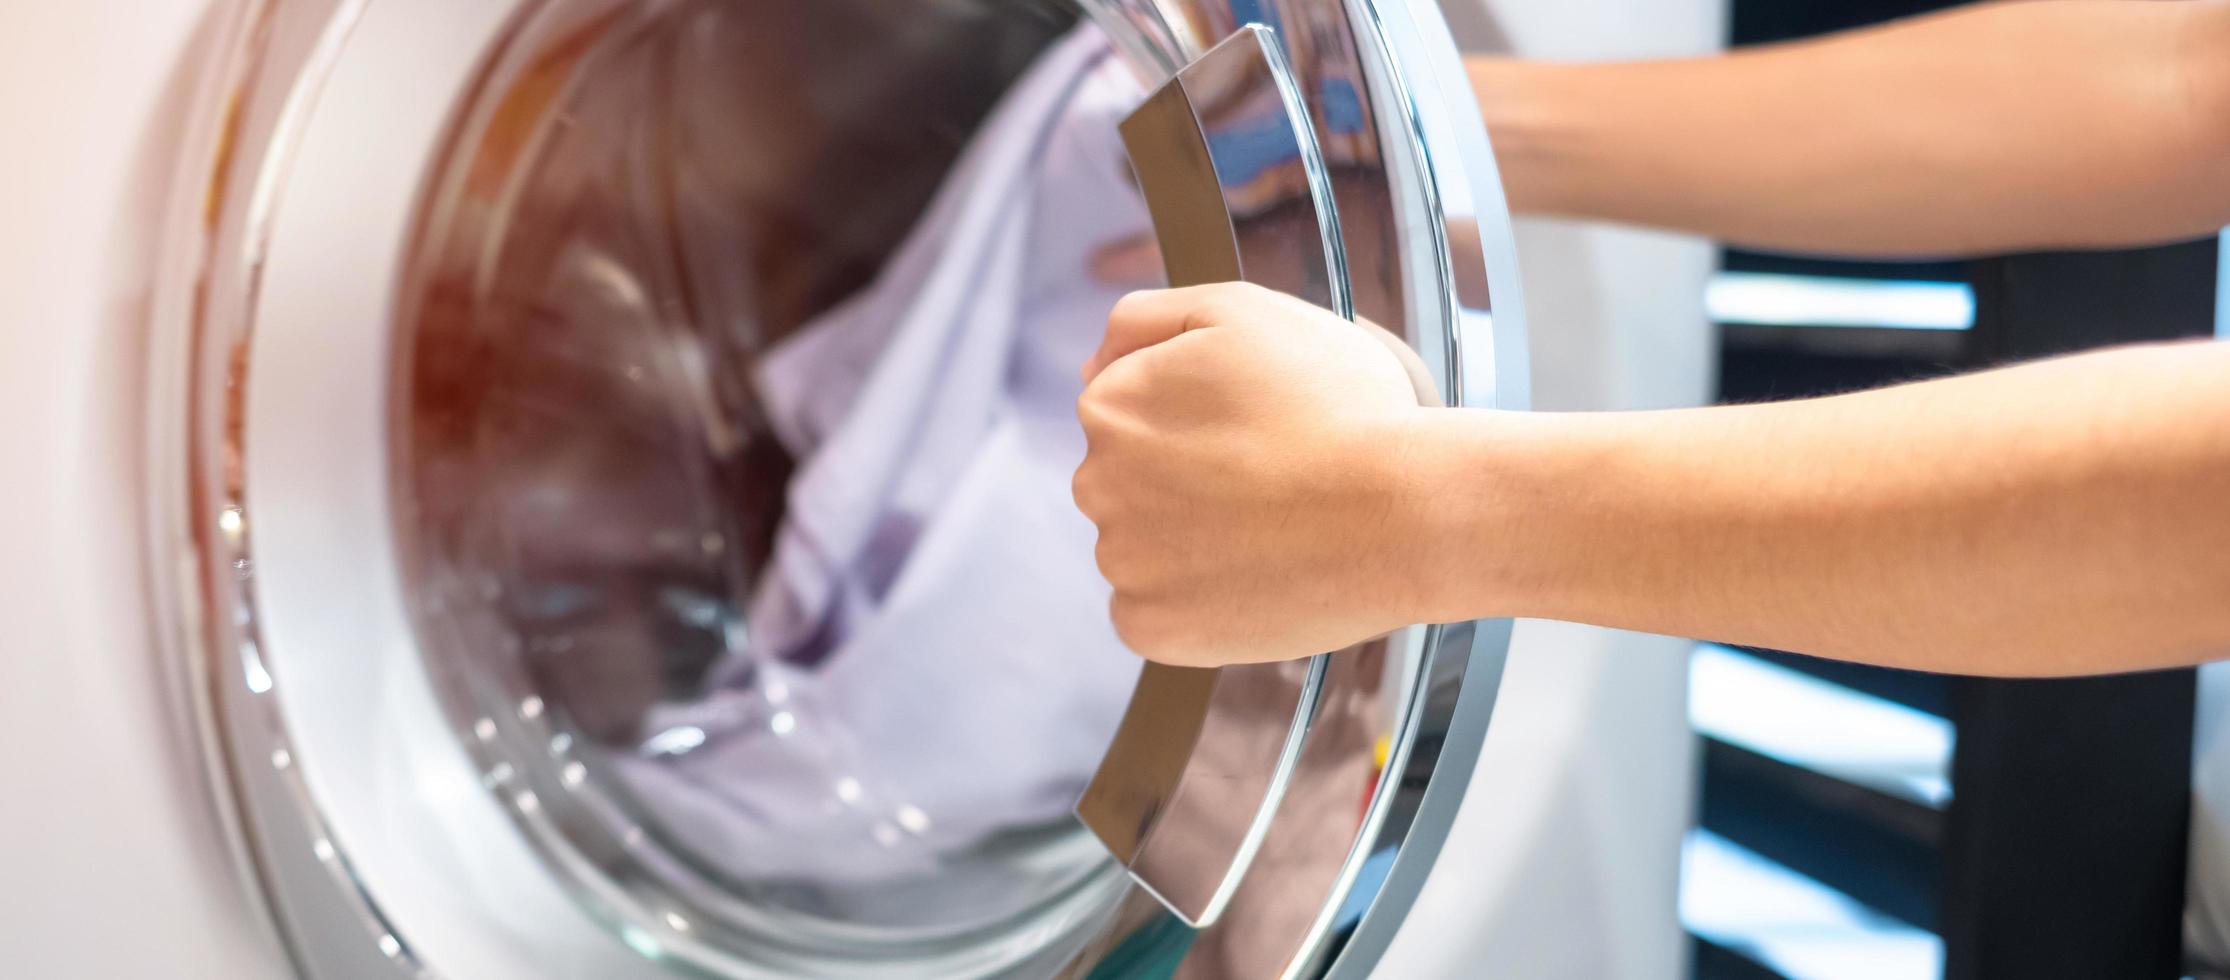 Housewife Woman hand holding clothes inside Washing Machine in laundry ...